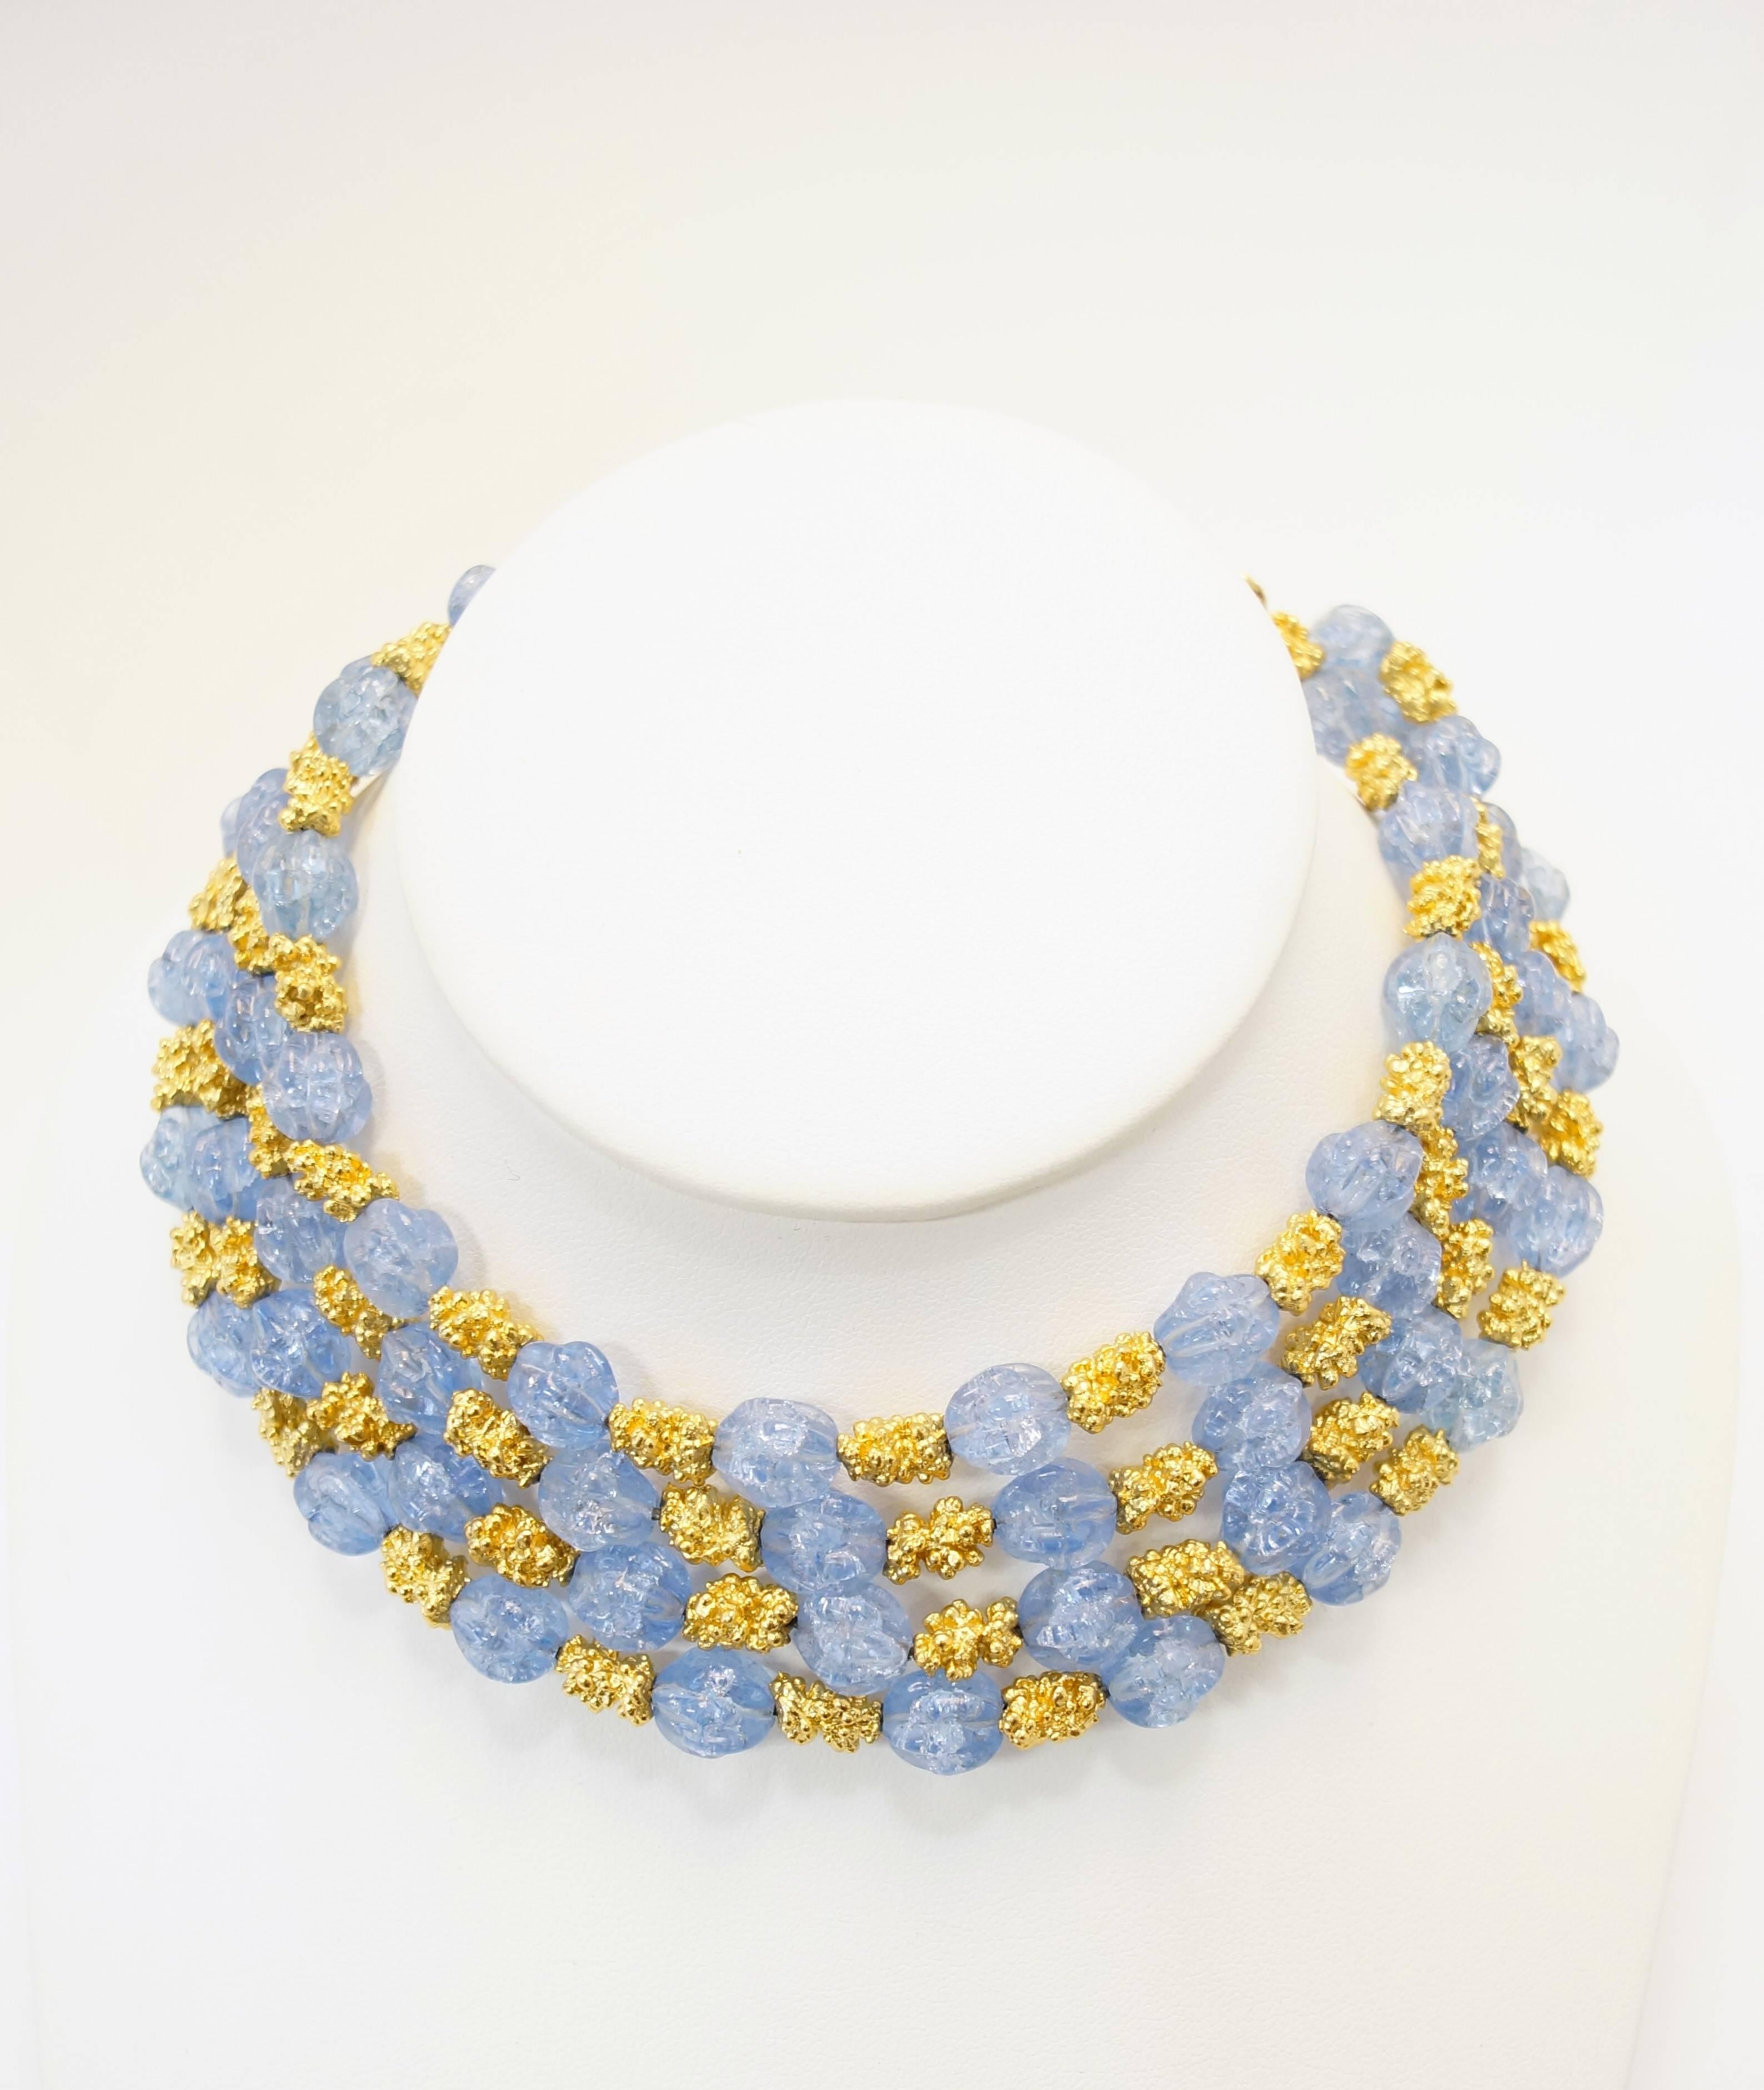 
Gorgeous gold and cornflower blue parure by Trifari! Excellently preserved for almost 70's years. 

This parure consists of a necklace, bracelet, and earrings. The four strand necklace is composed of alternating gold tone nugget beads and